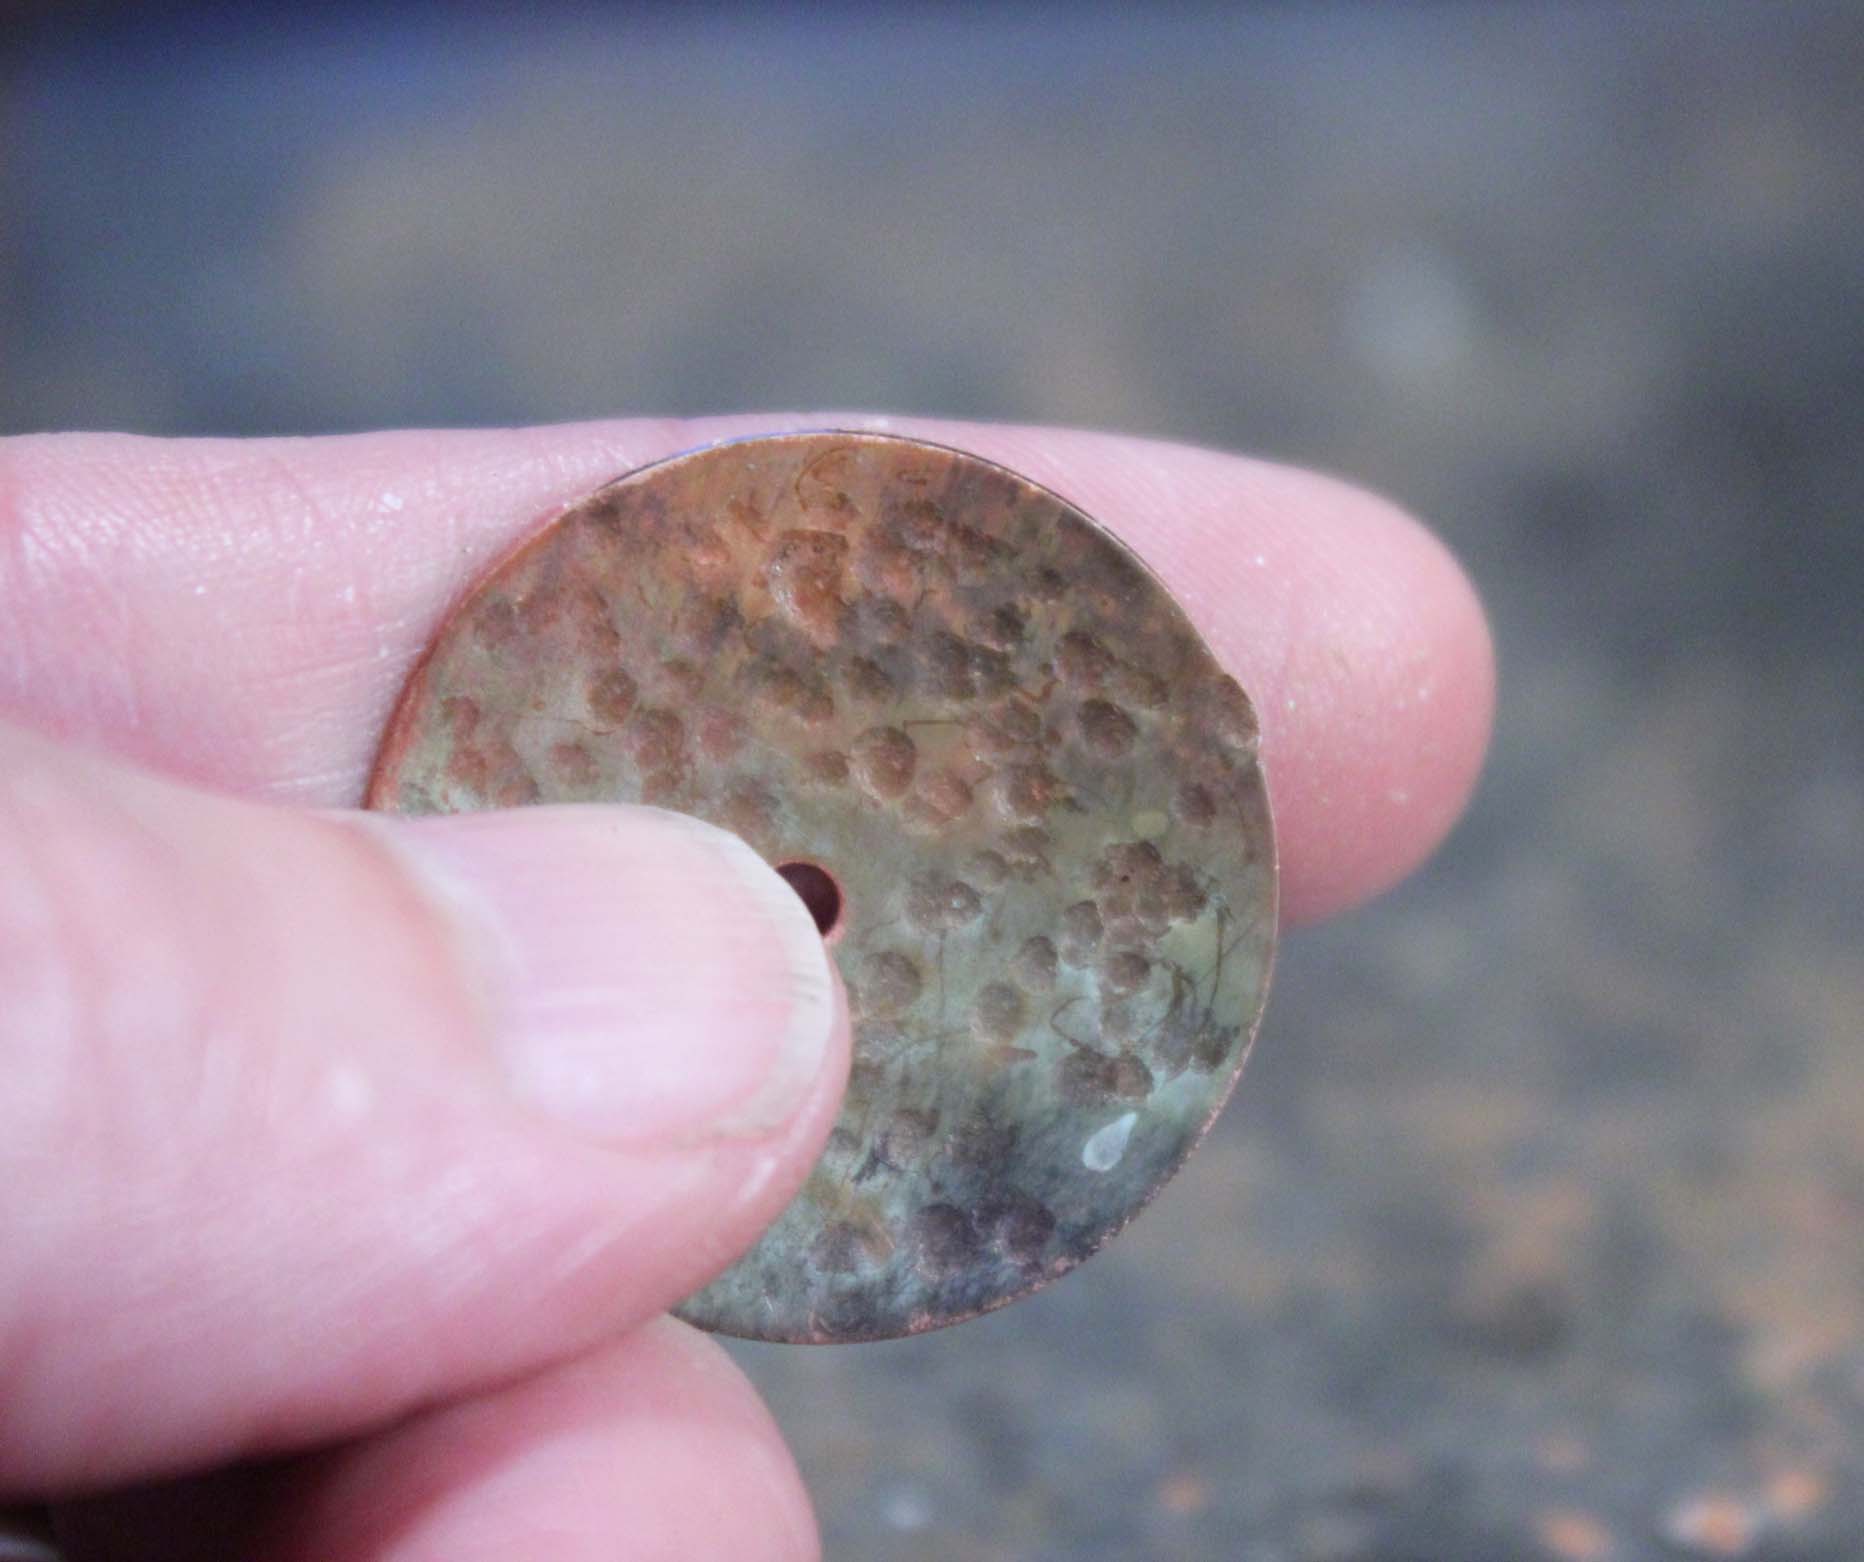 copper disc with uneven edge caused from striking with a ball peen hammer